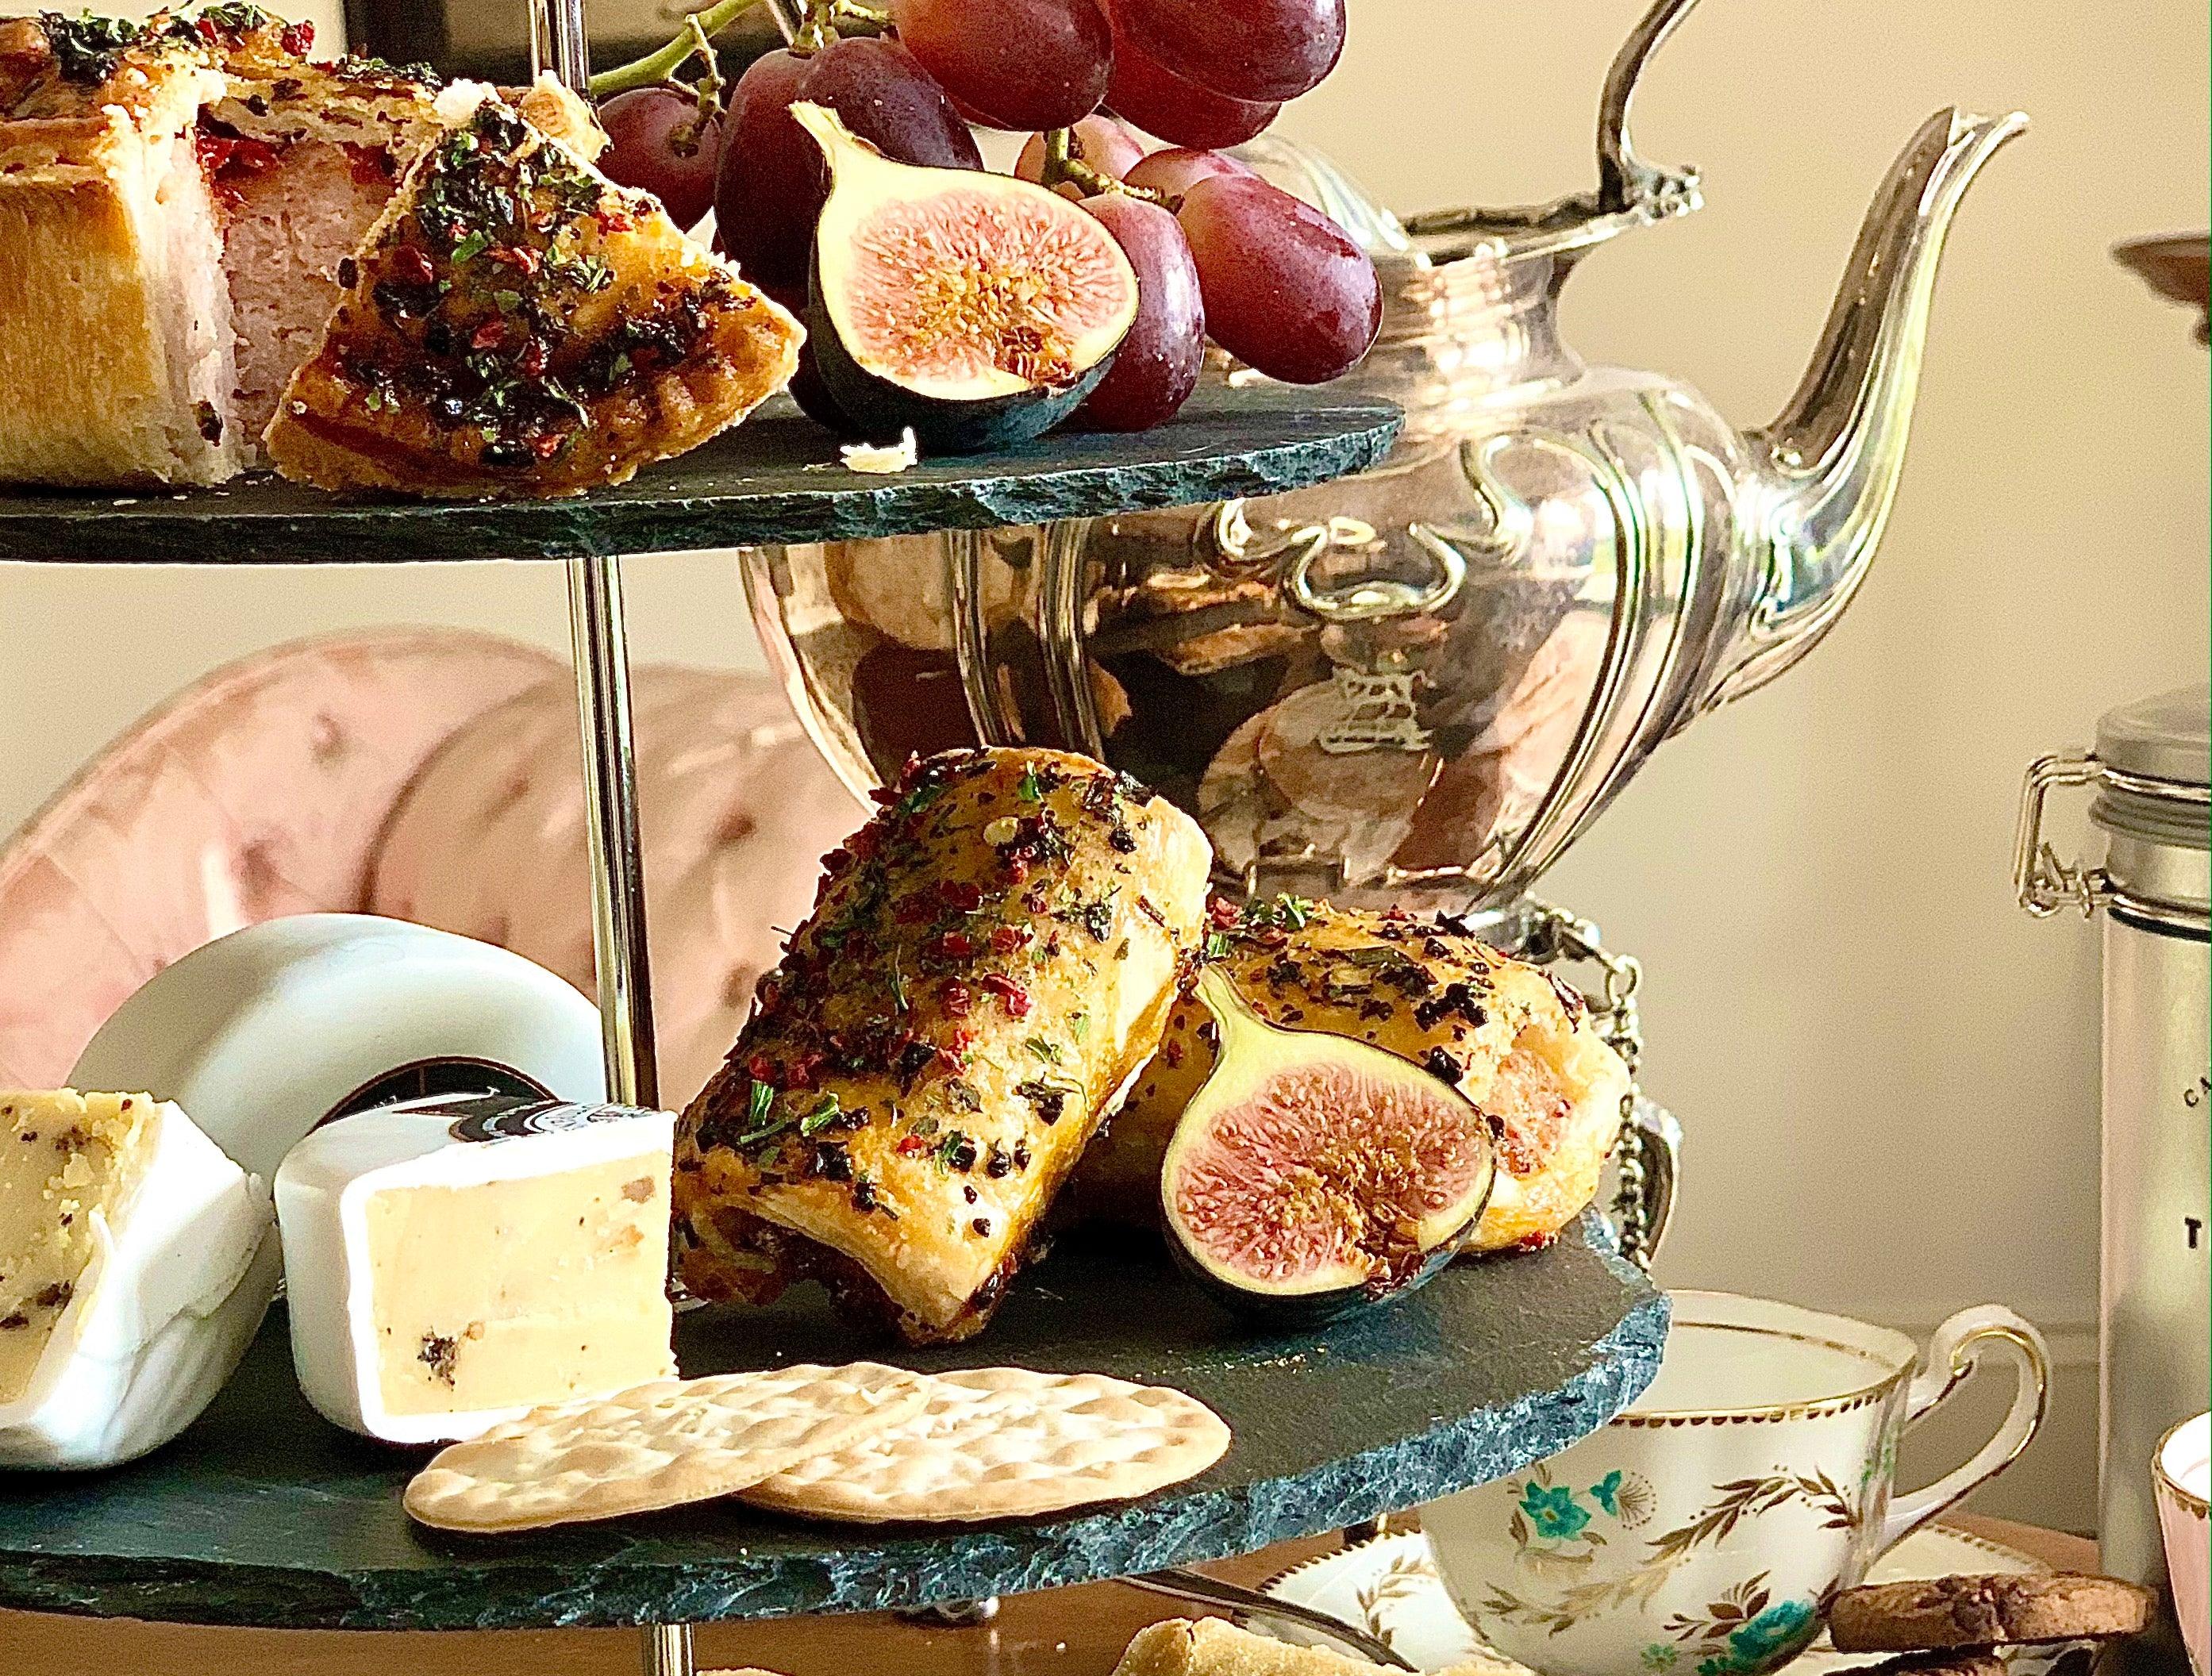 Deluxe Savoury Afternoon Tea For 2 - With 3 Tier Stand & Prosecco - Celebration Cheeses